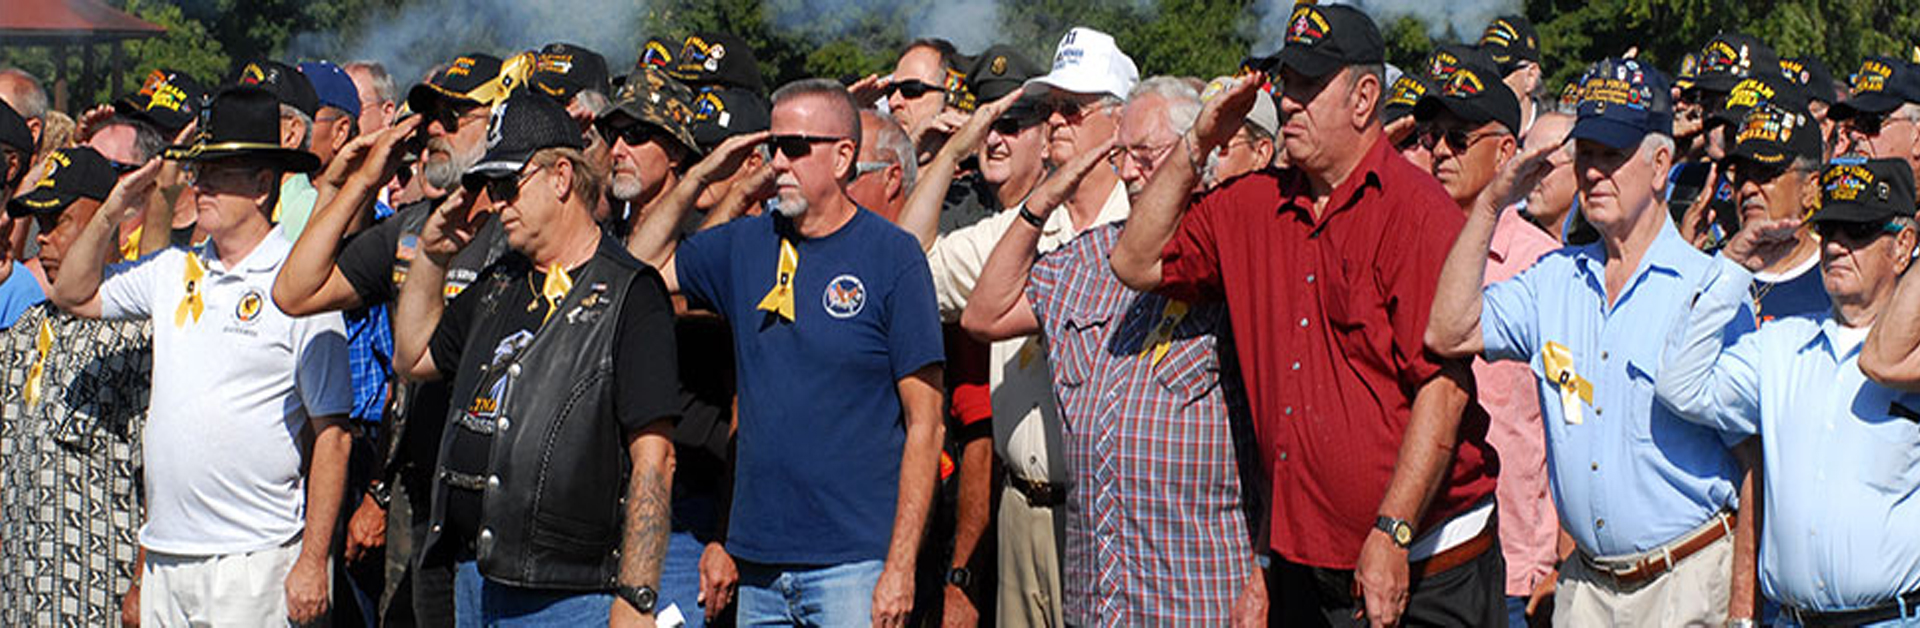 Remembering and Celebrating the Courage of Our Vietnam Veterans...